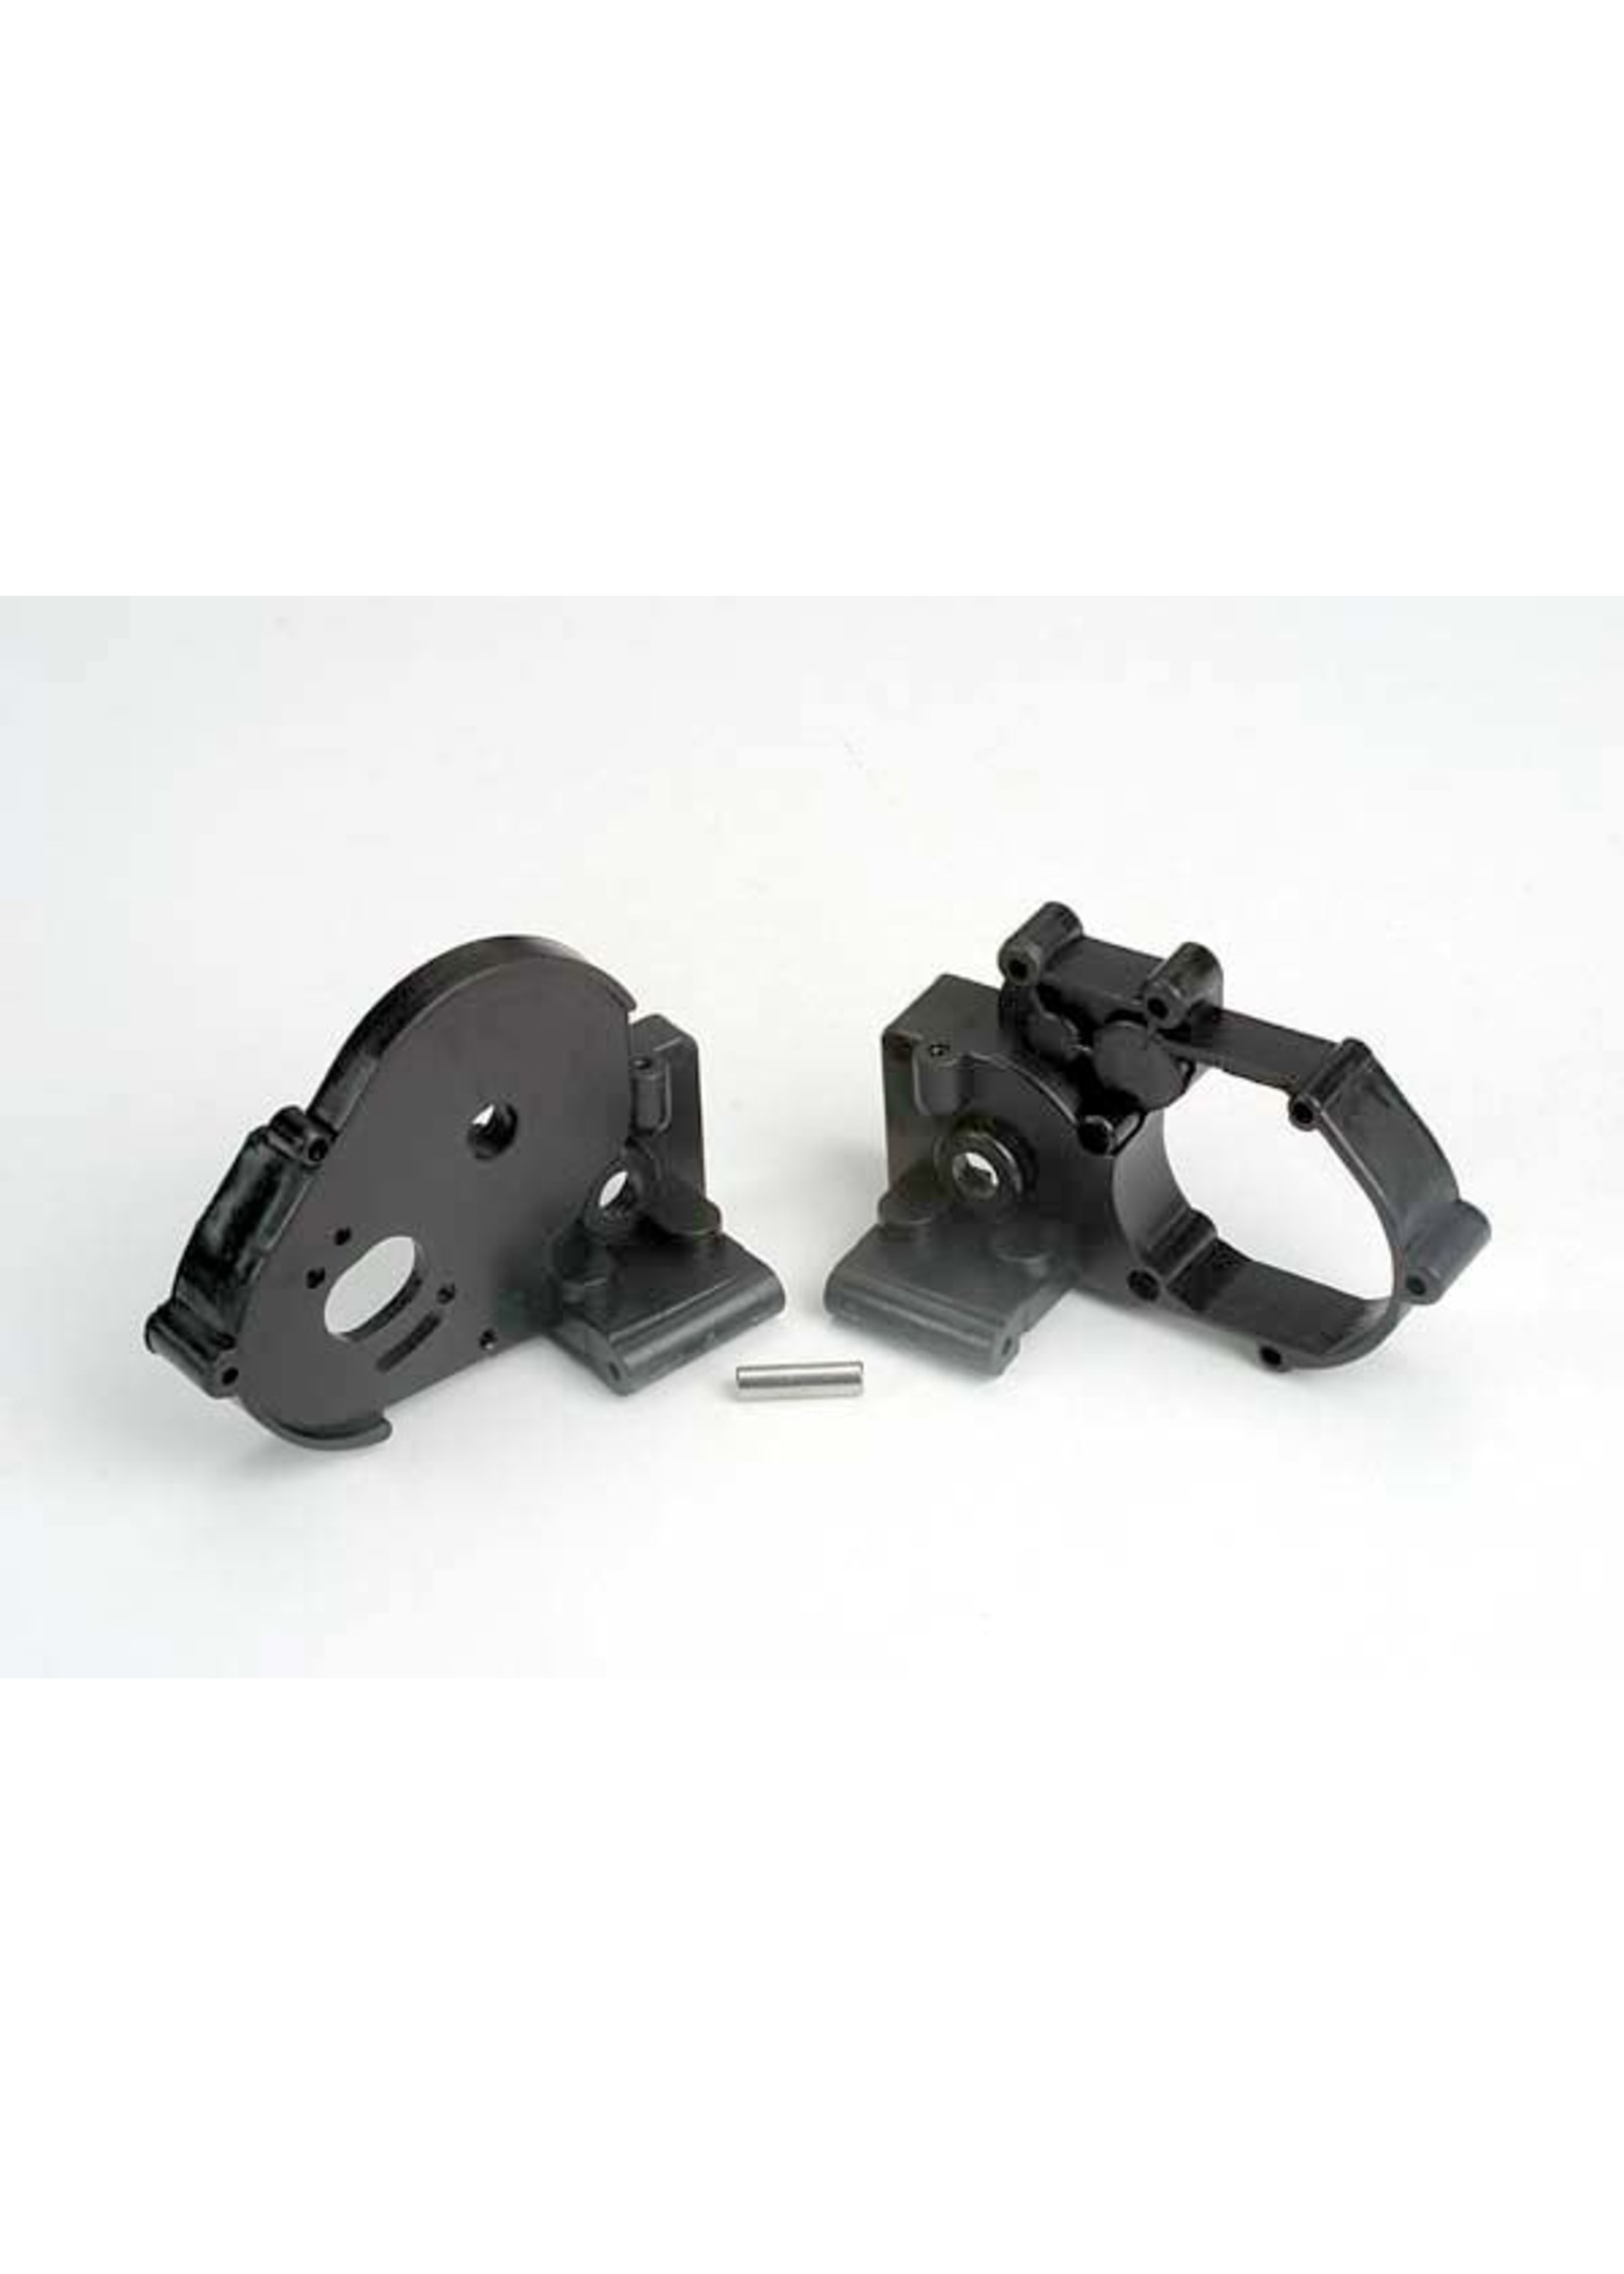 Traxxas 3691 - Gearbox Halves, Left and Right - Black